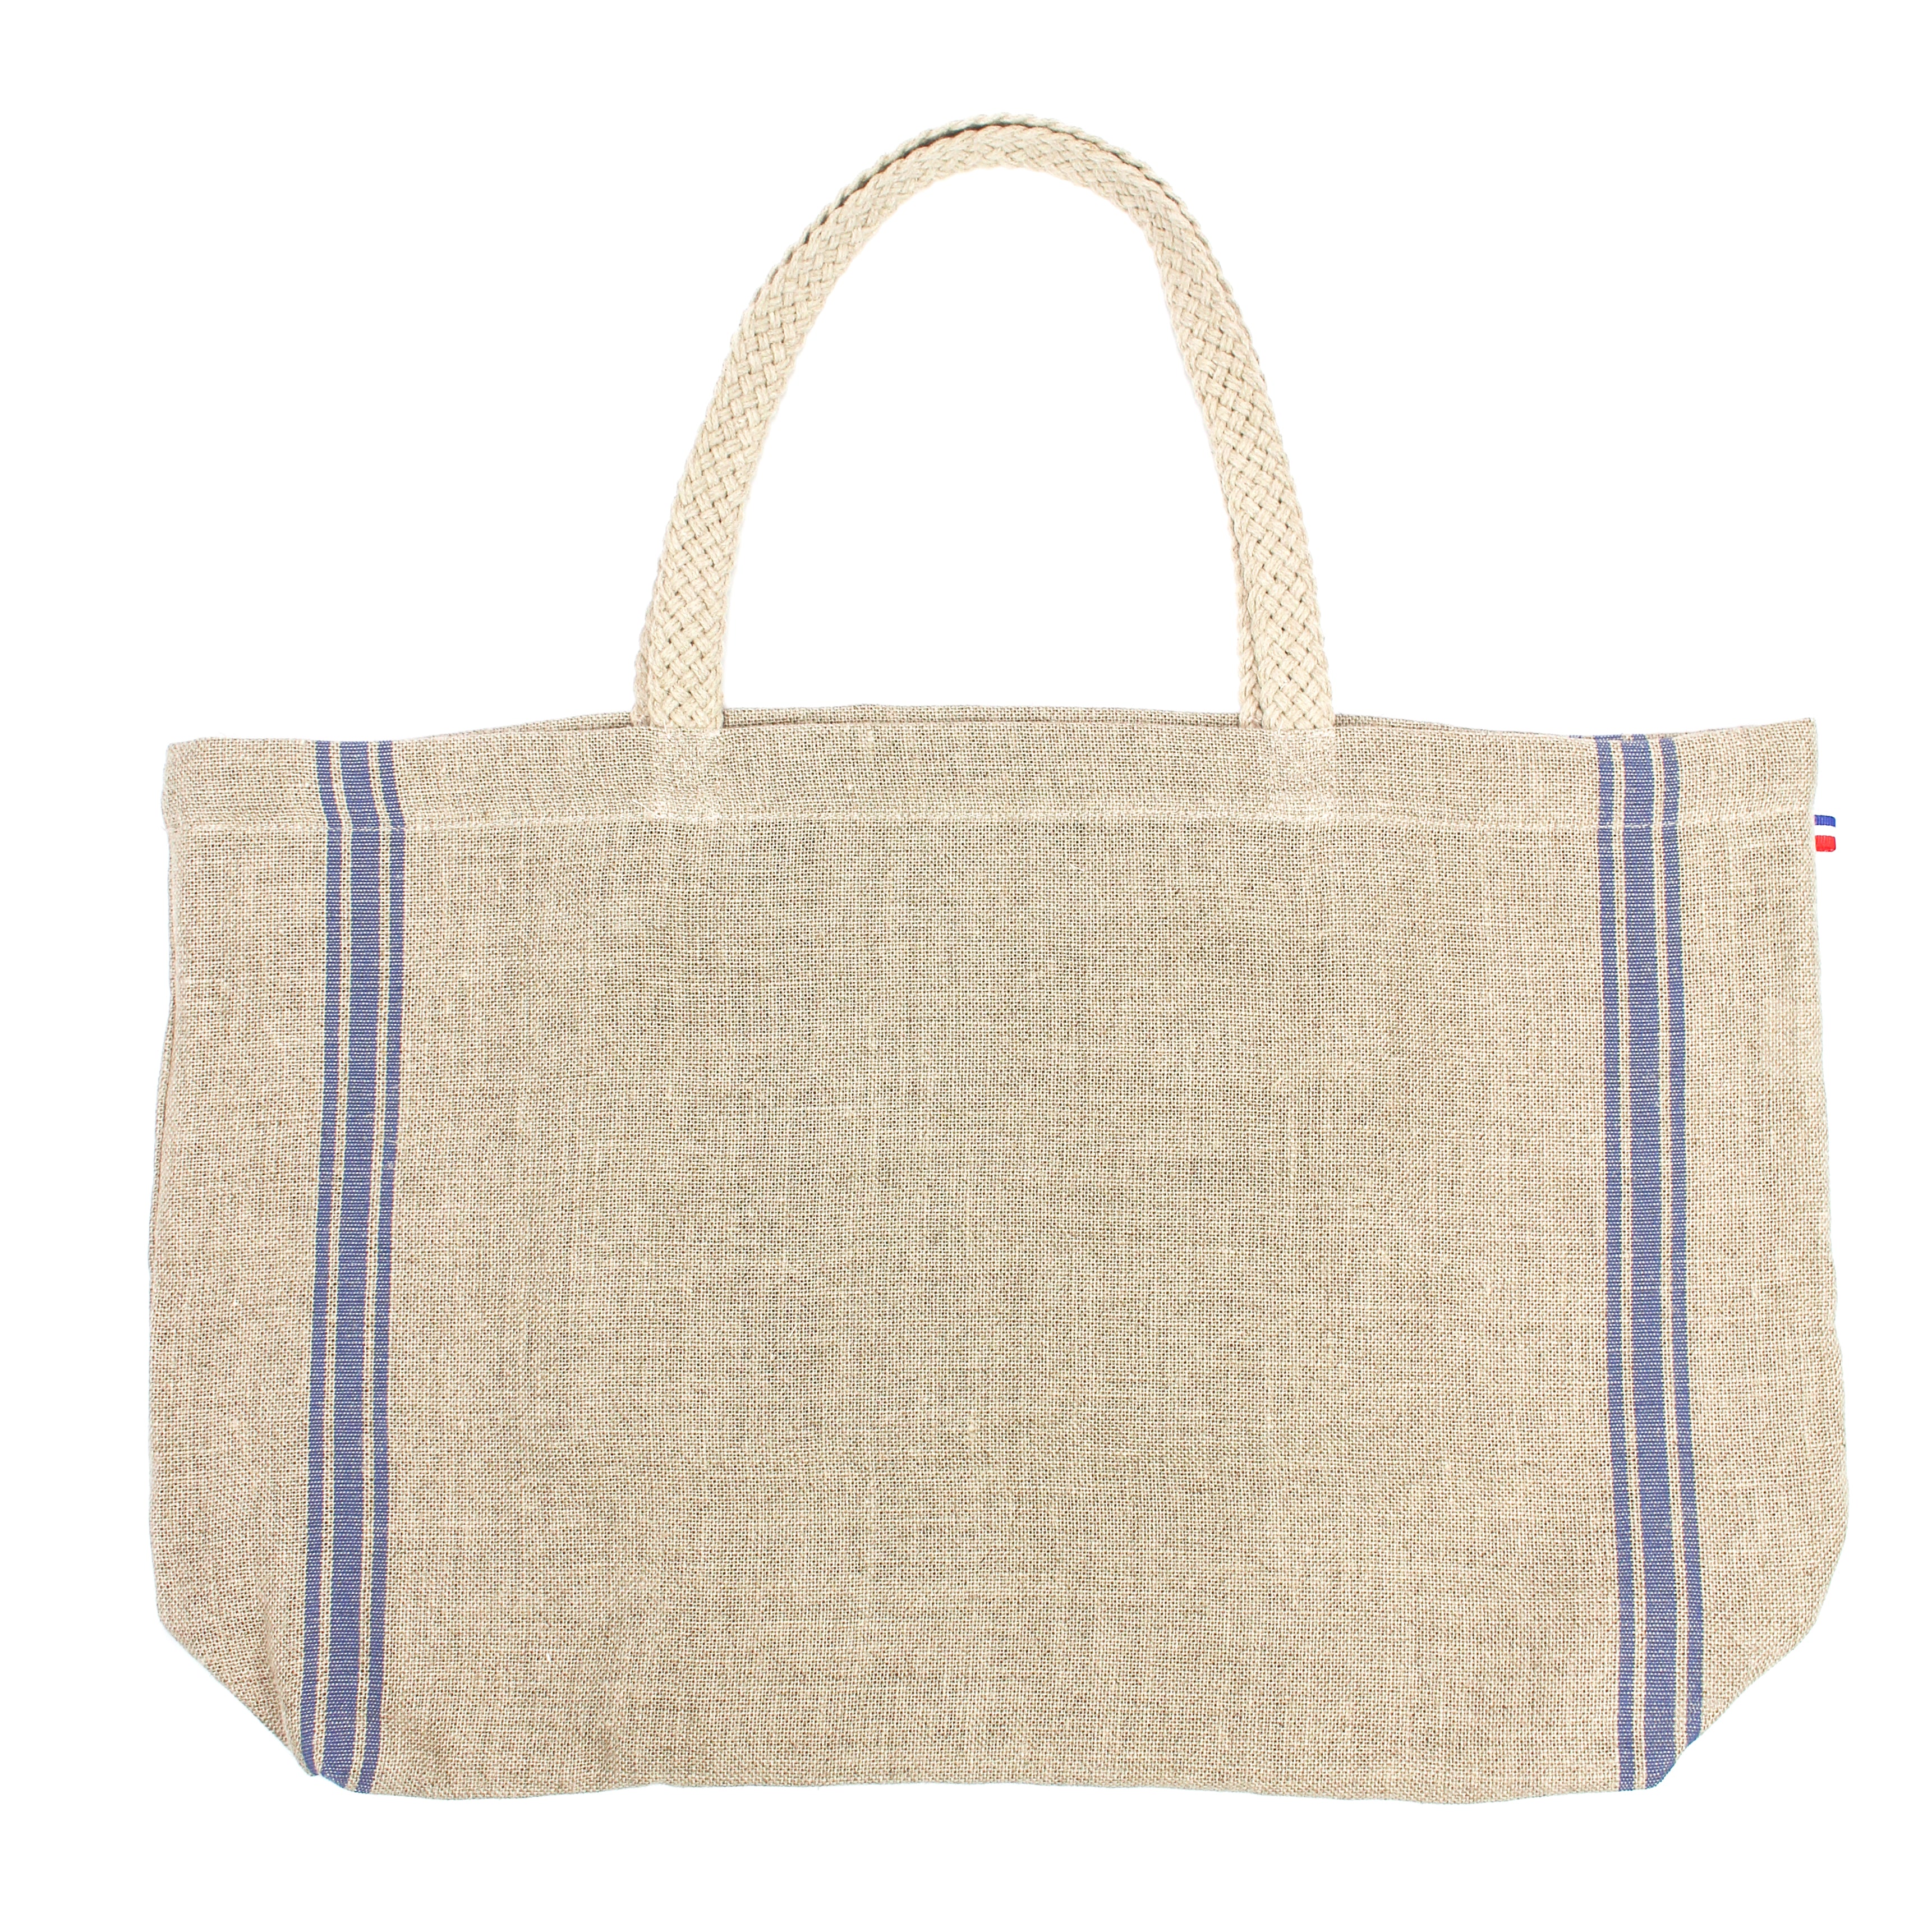 Monogramme Blue Thieffry Linen Shopping Bag with Braided Handle and Inner Zipper Pocket - Textile - Thieffry - Brand_Thieffry - New Arrivals - Shopping Bags - Textiles_Tote Bags - Thieffry - IMG_0340_edit